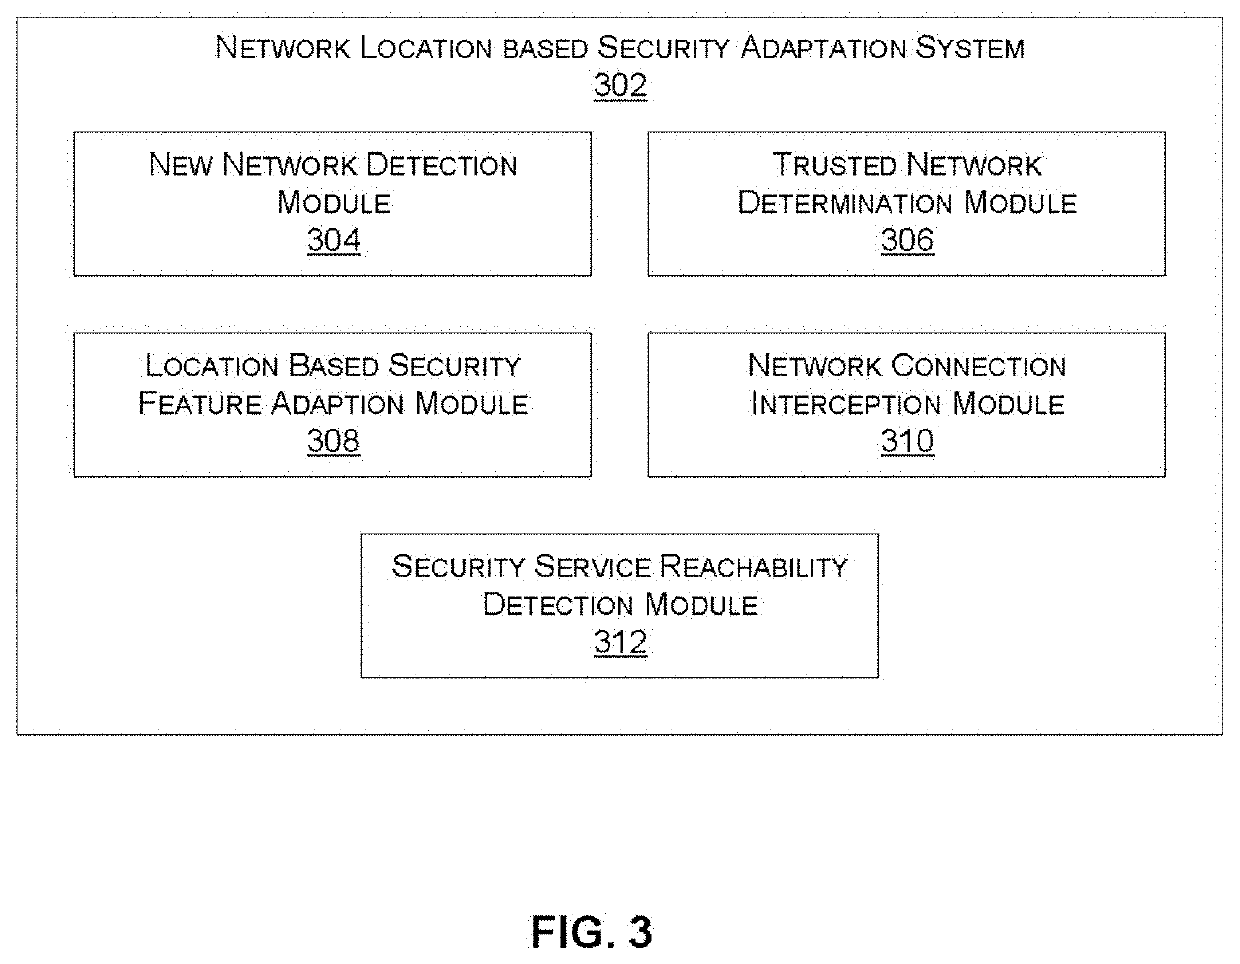 Adjusting behavior of an endpoint security agent based on network location